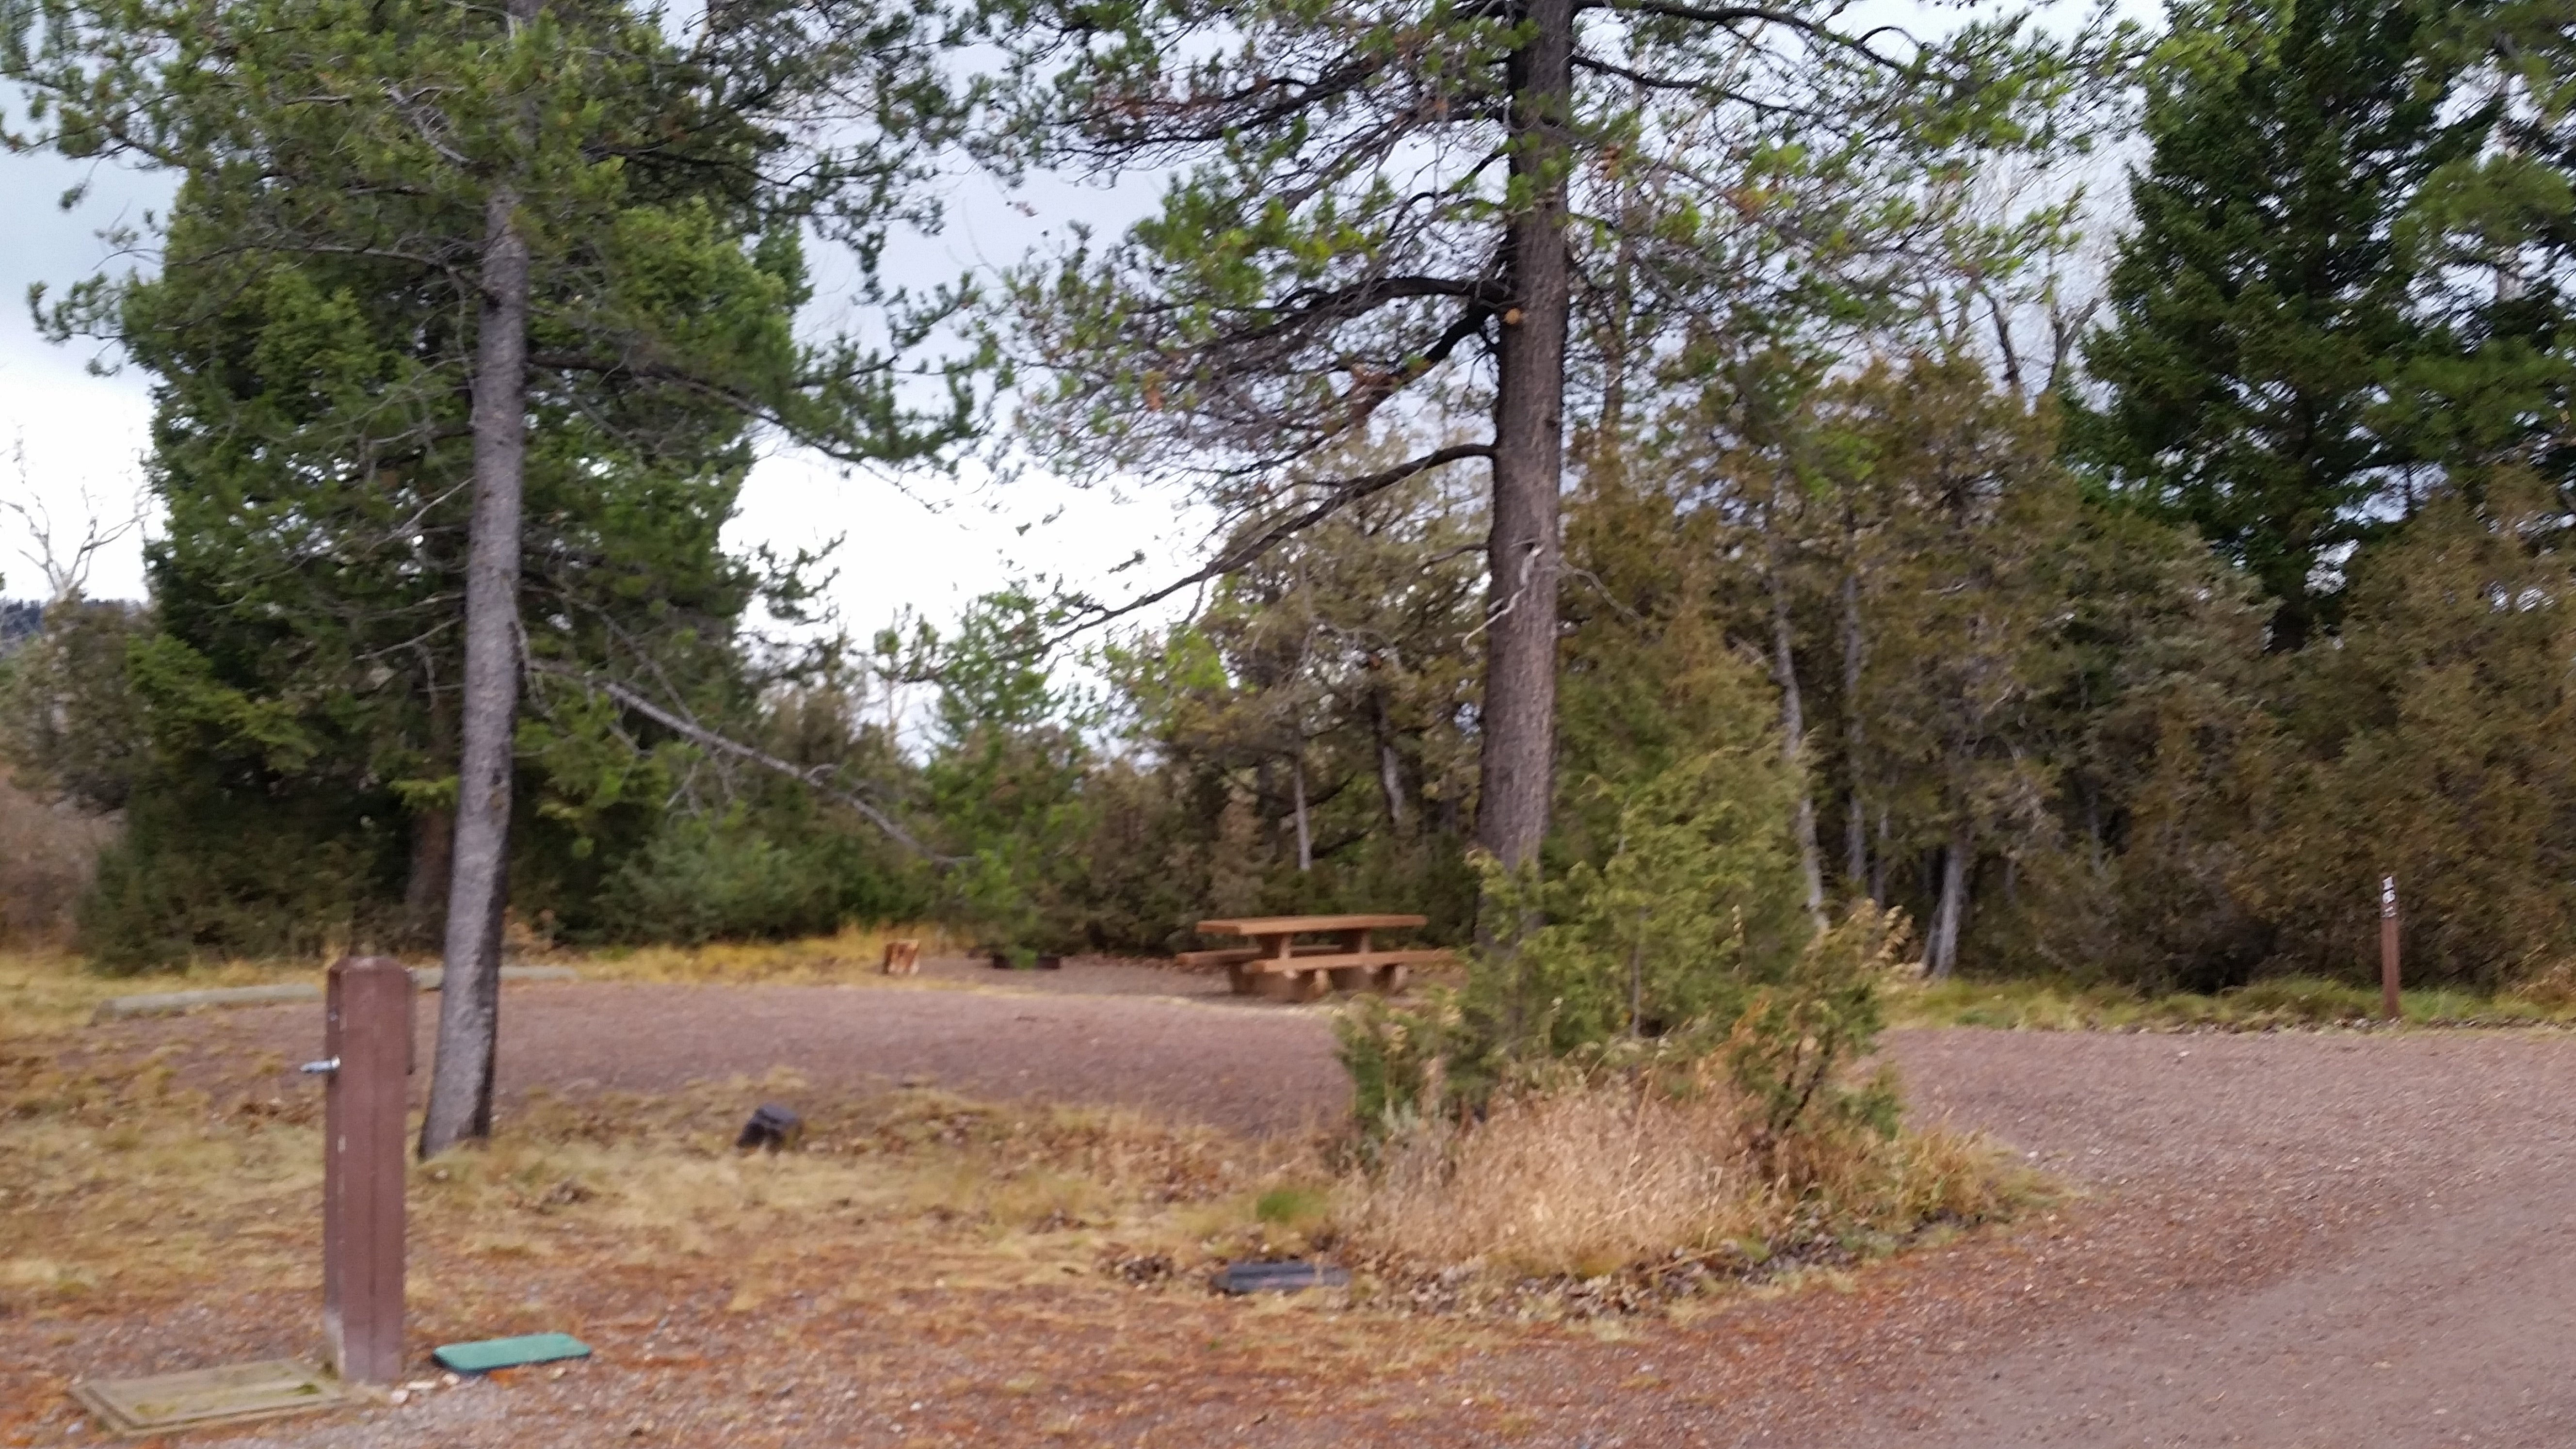 Camper submitted image from Aspen Grove Campground - 1